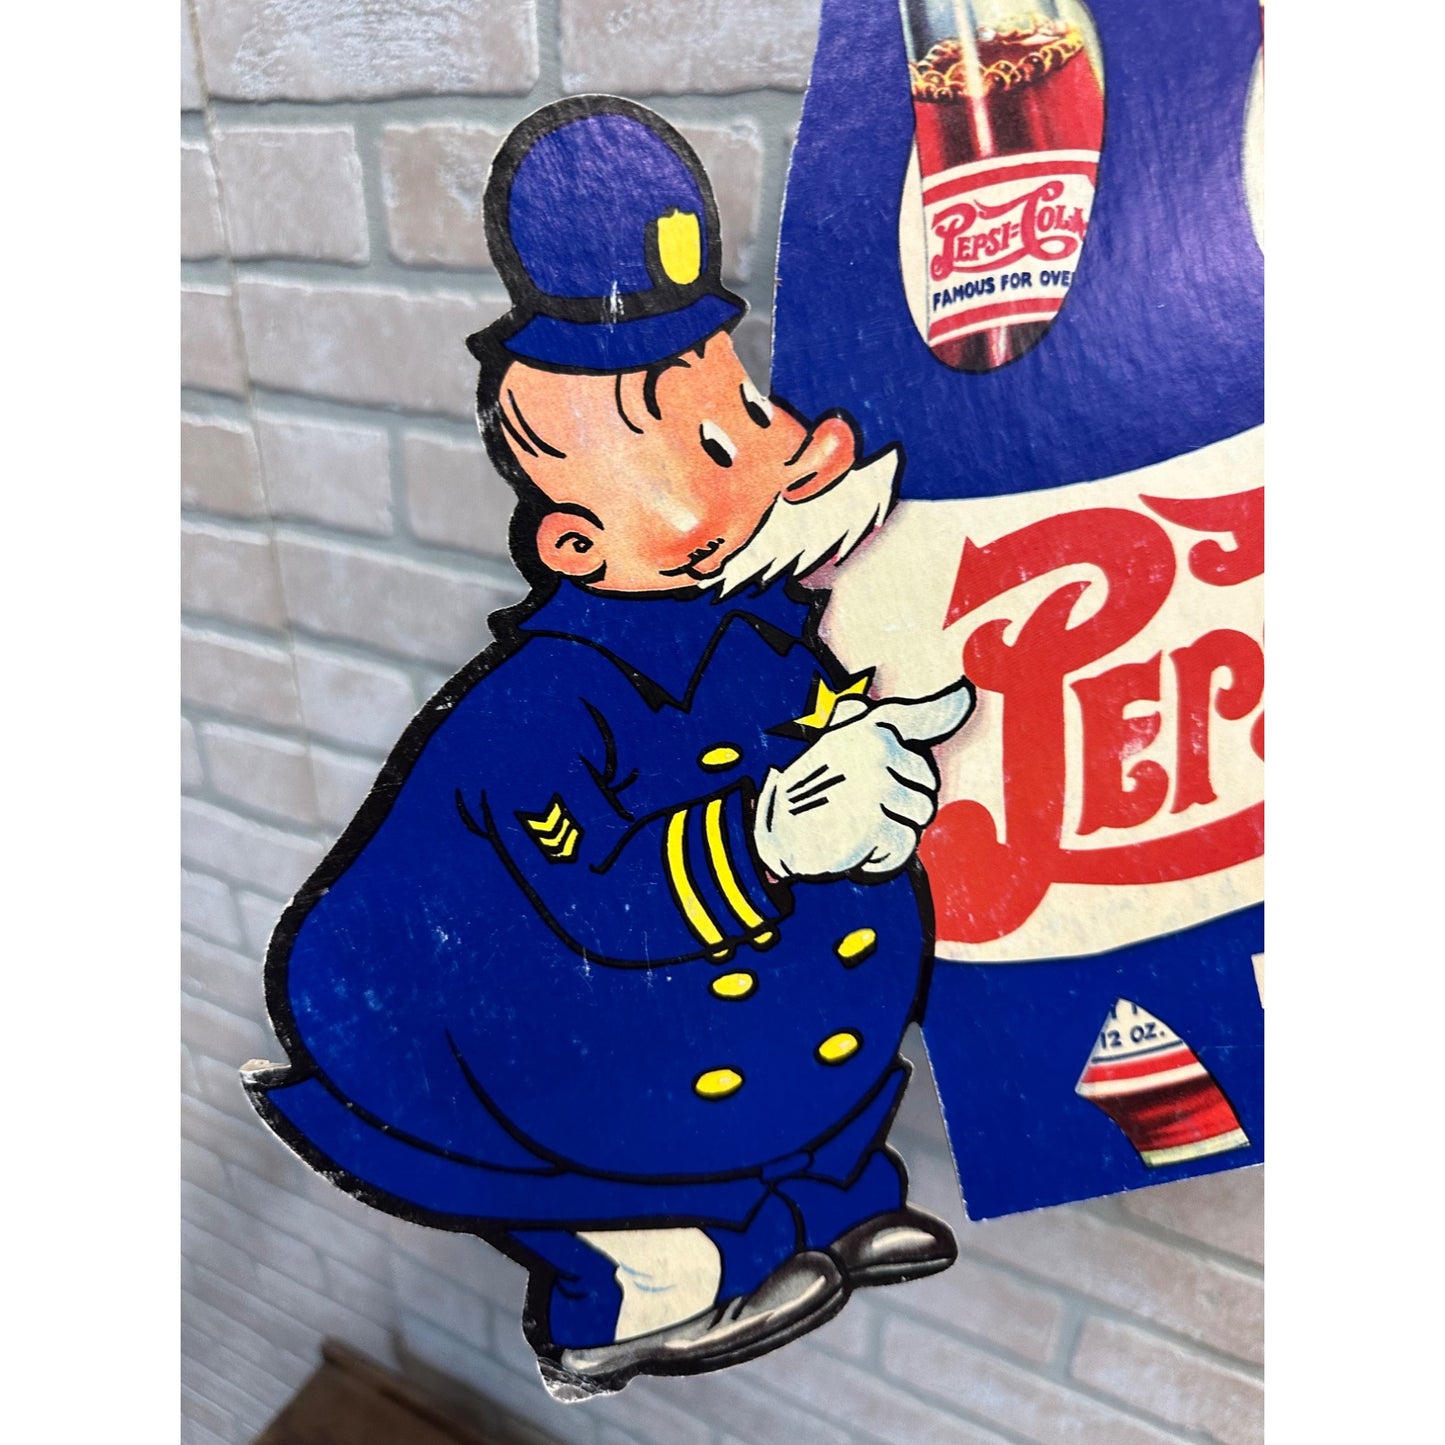 PEPSI COLA "PEPSI & PETE"  CARDBOARD DIECUT DOUBLE-SIDED ADVERTISING SIGN